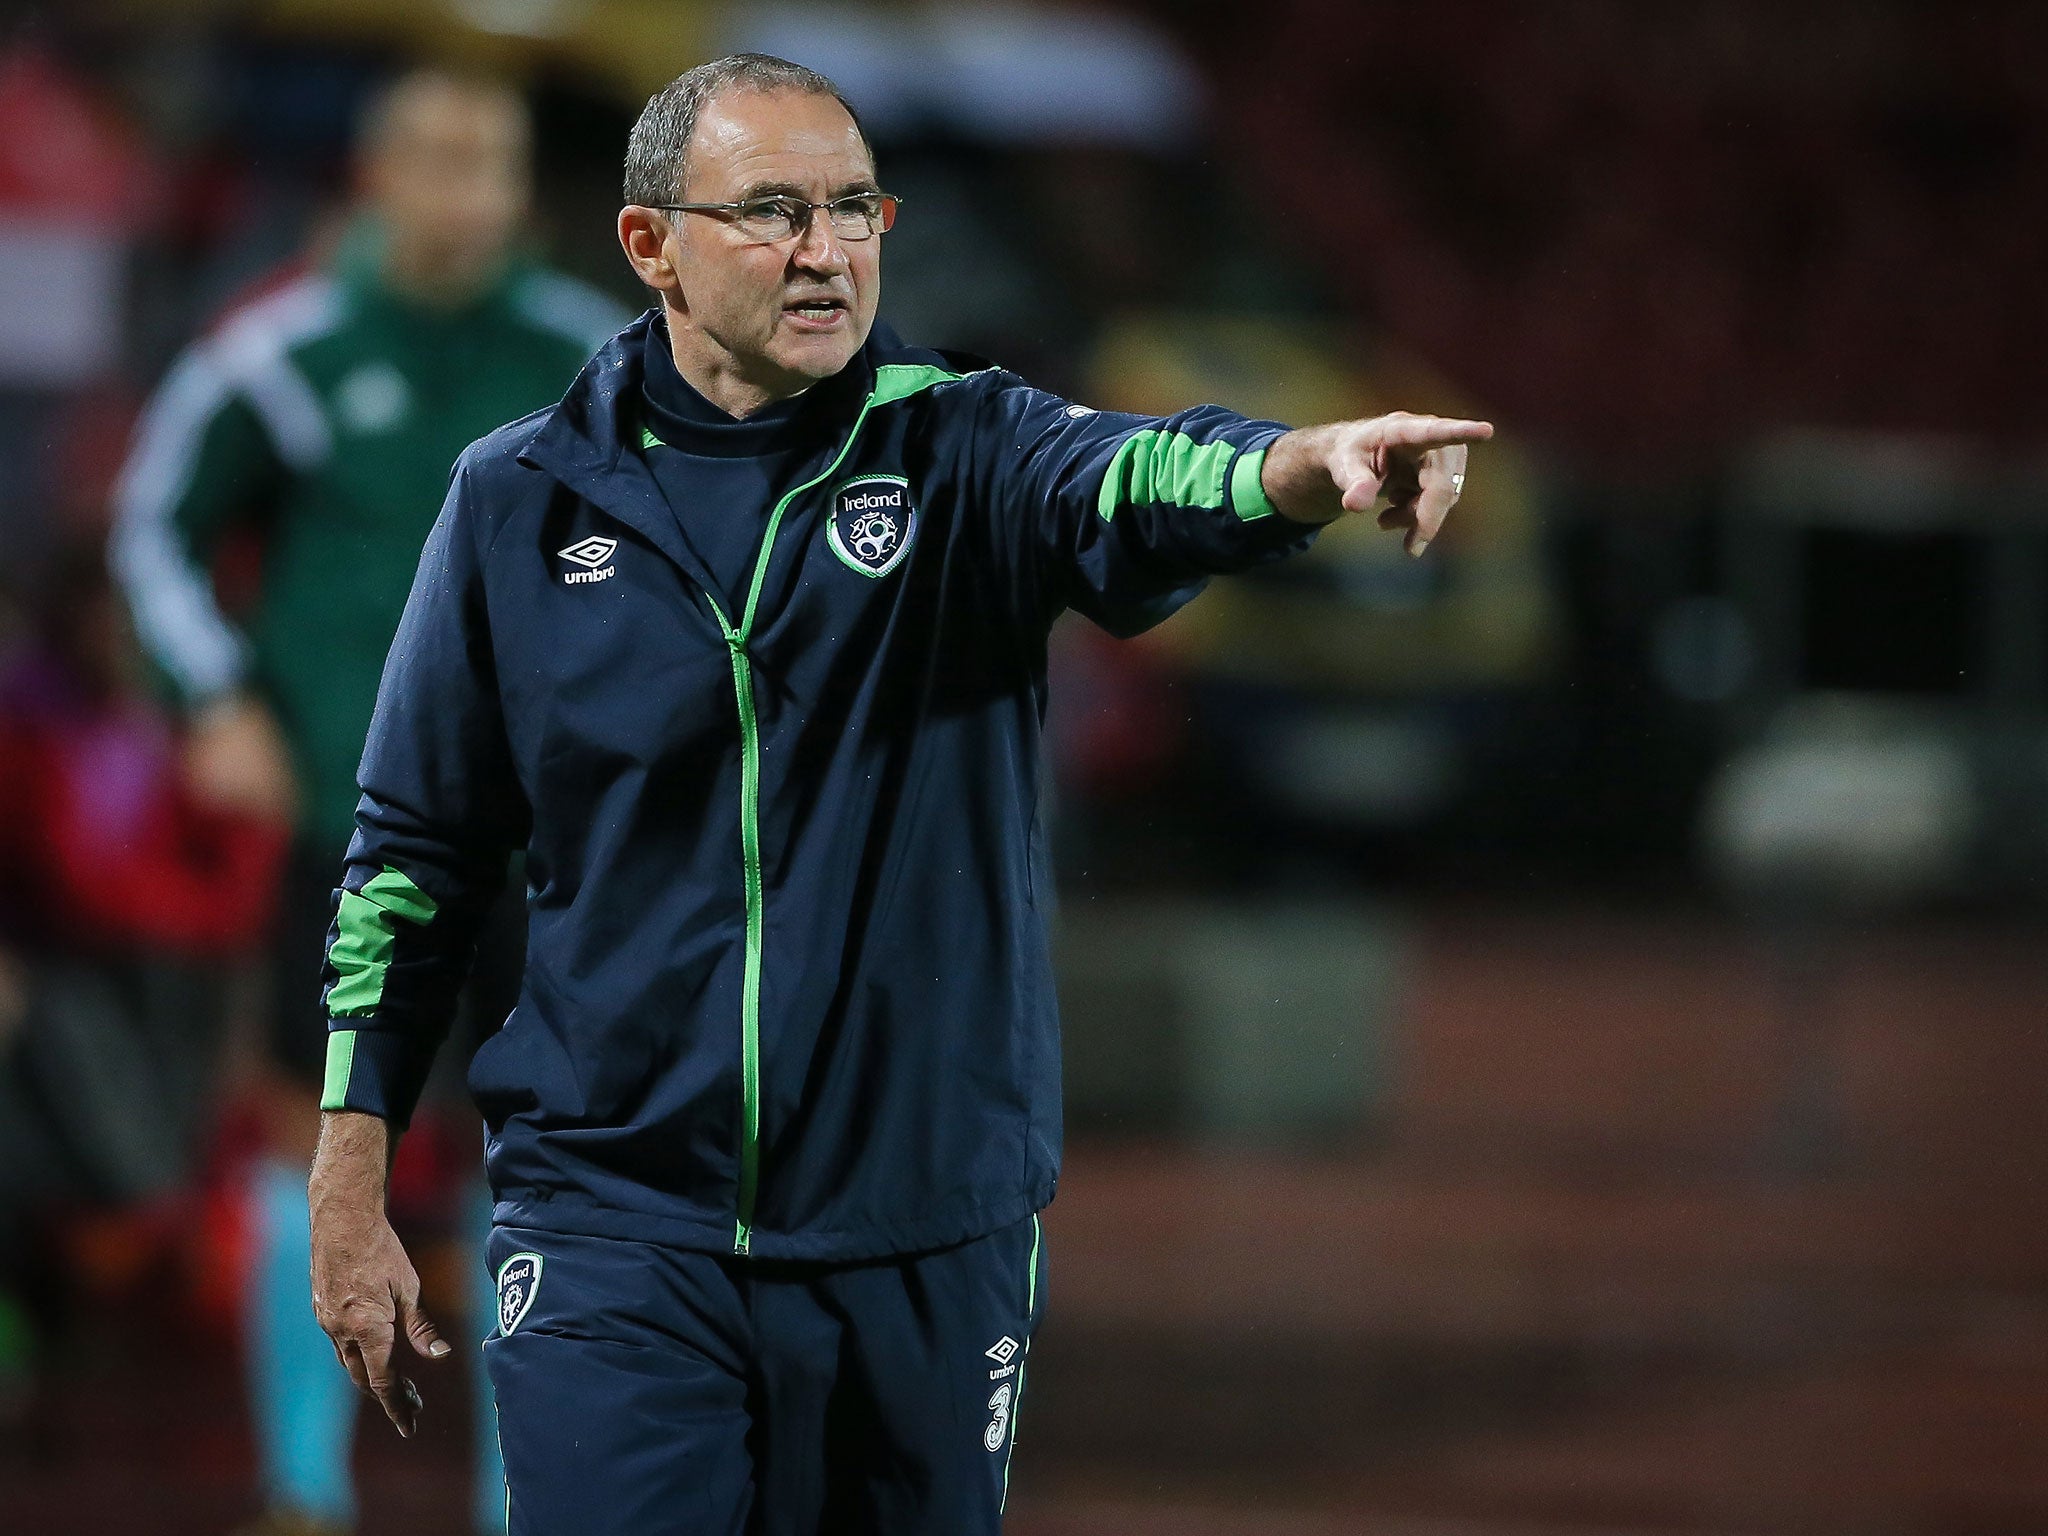 O'Neill has said he has no intentions of leaving his current position as head coach of Republic of Ireland